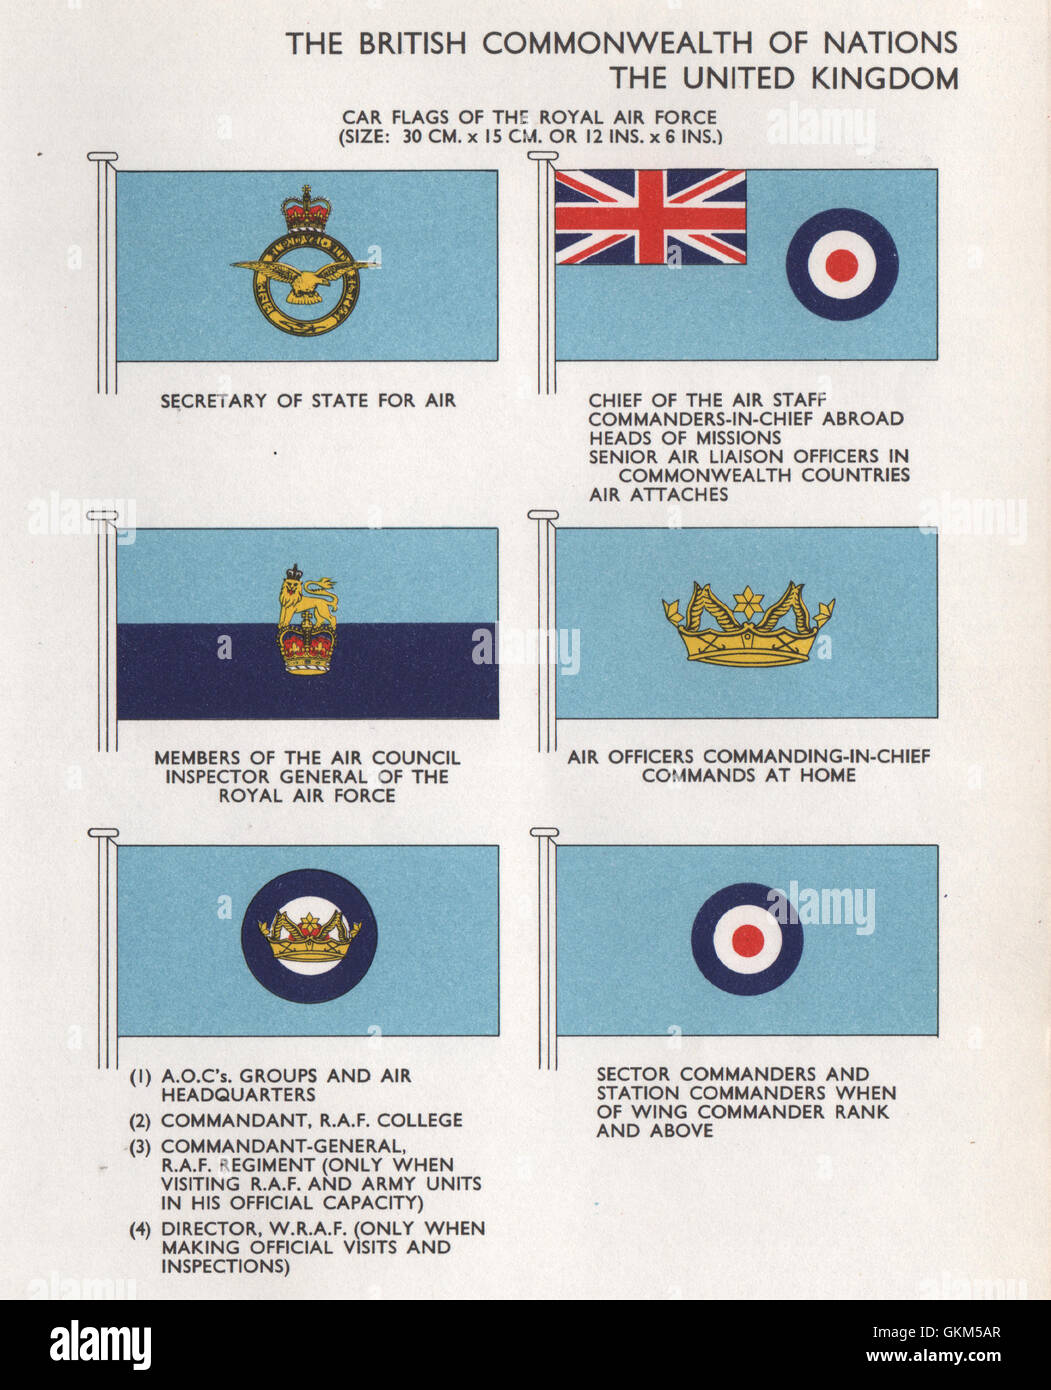 ROYAL AIR FORCE CAR FLAGS. Secretary of State for Air. Chief of Air Staff, 1958 Stock Photo